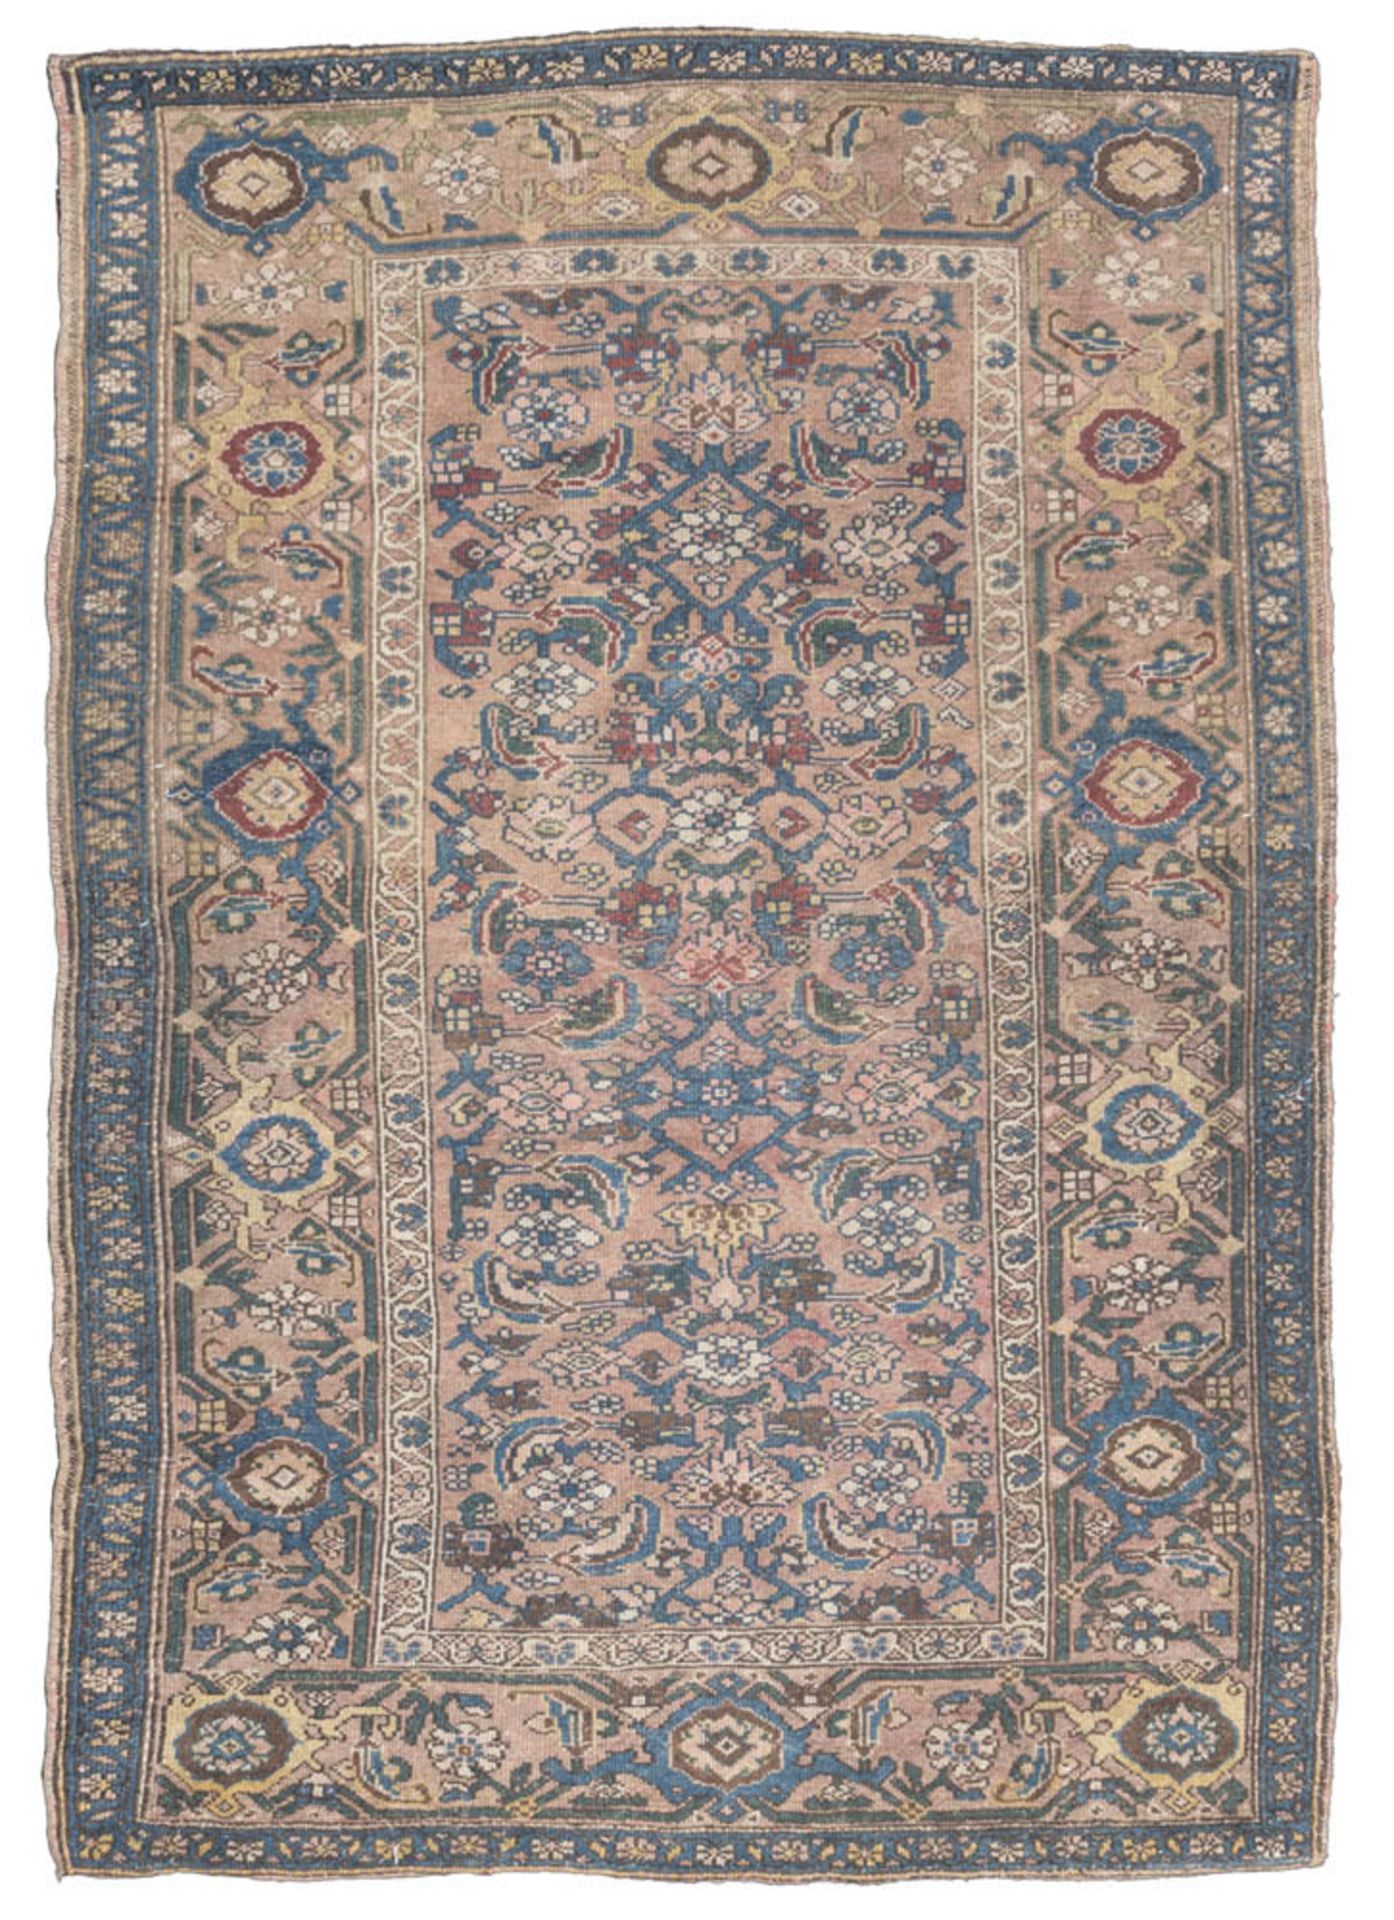 OLD MALAYER CARPET, LATE 19TH CENTURY